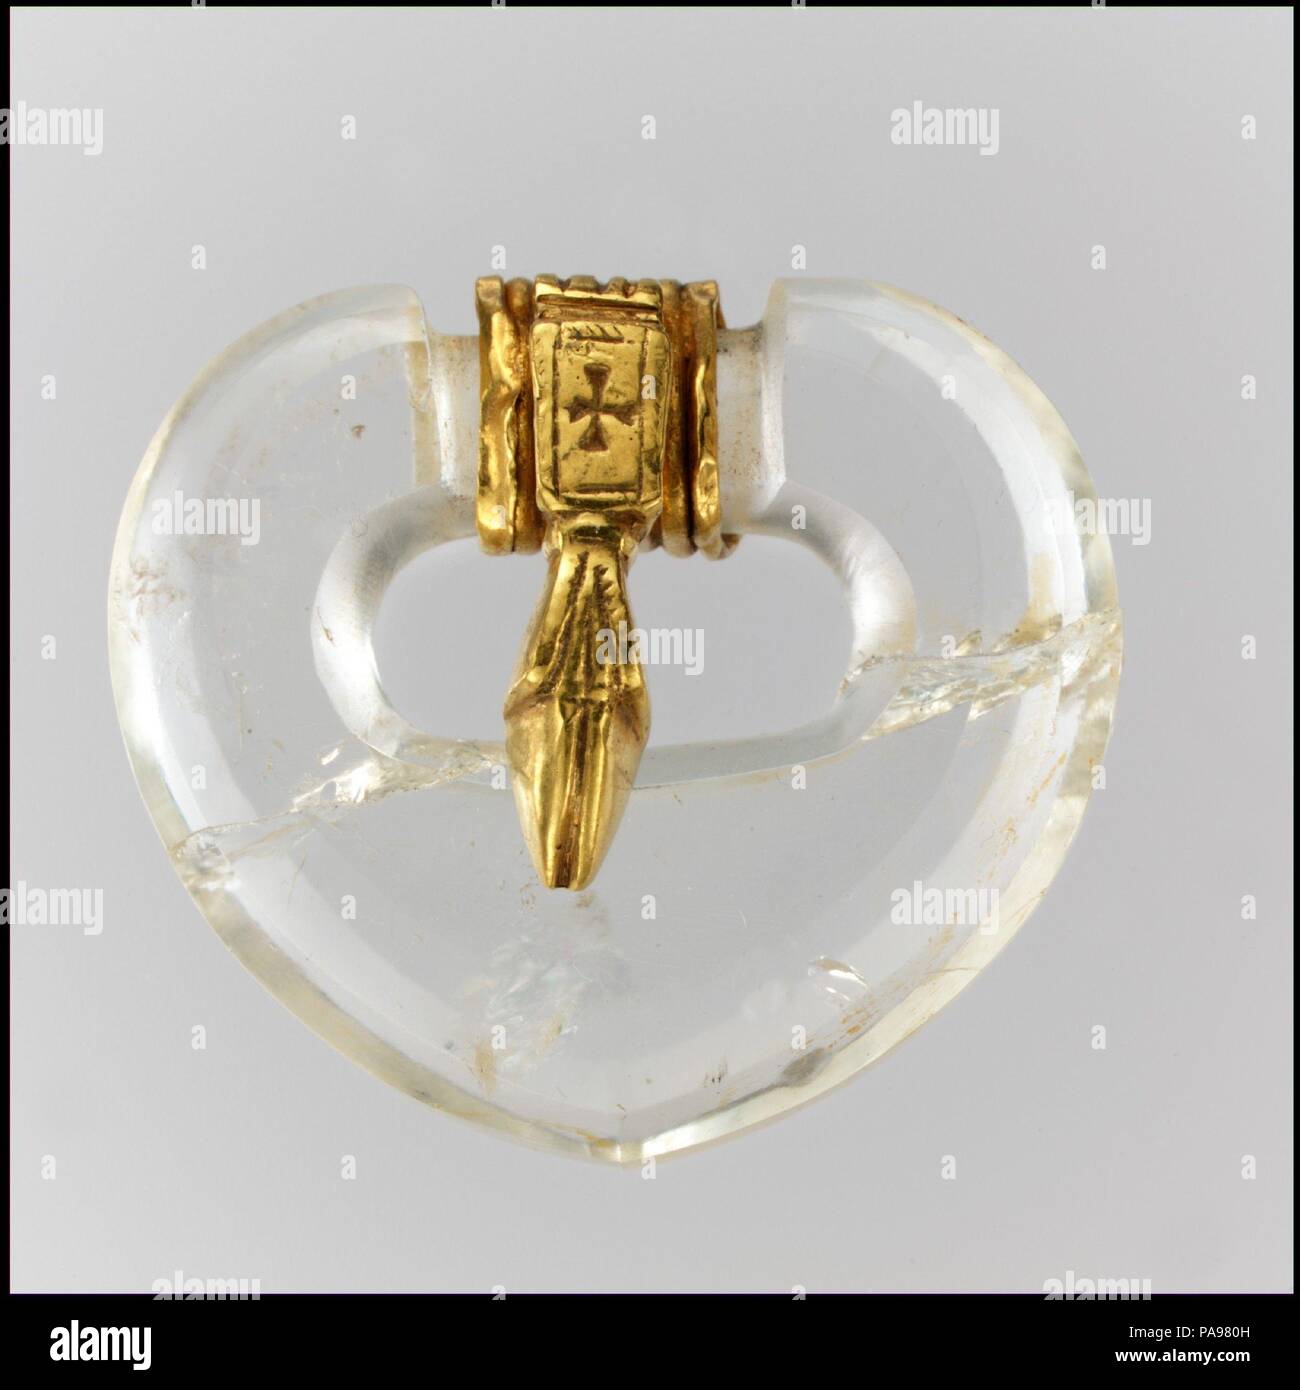 Rock Crystal Belt Buckle. Culture: East German (buckle), Byzantine (tongue). Dimensions: Overall: 1 3/4 x 1 9/16 x 11/16 in. (4.5 x 4 x 1.8 cm). Date: ca. 500 (buckle), 500-600 (tongue).  It is impossible to know precisely when the delicate gold tongue was added to the buckle, but the ensemble conveys the ease with which Byzantine and Germanic styles were combined. Museum: Metropolitan Museum of Art, New York, USA. Stock Photo